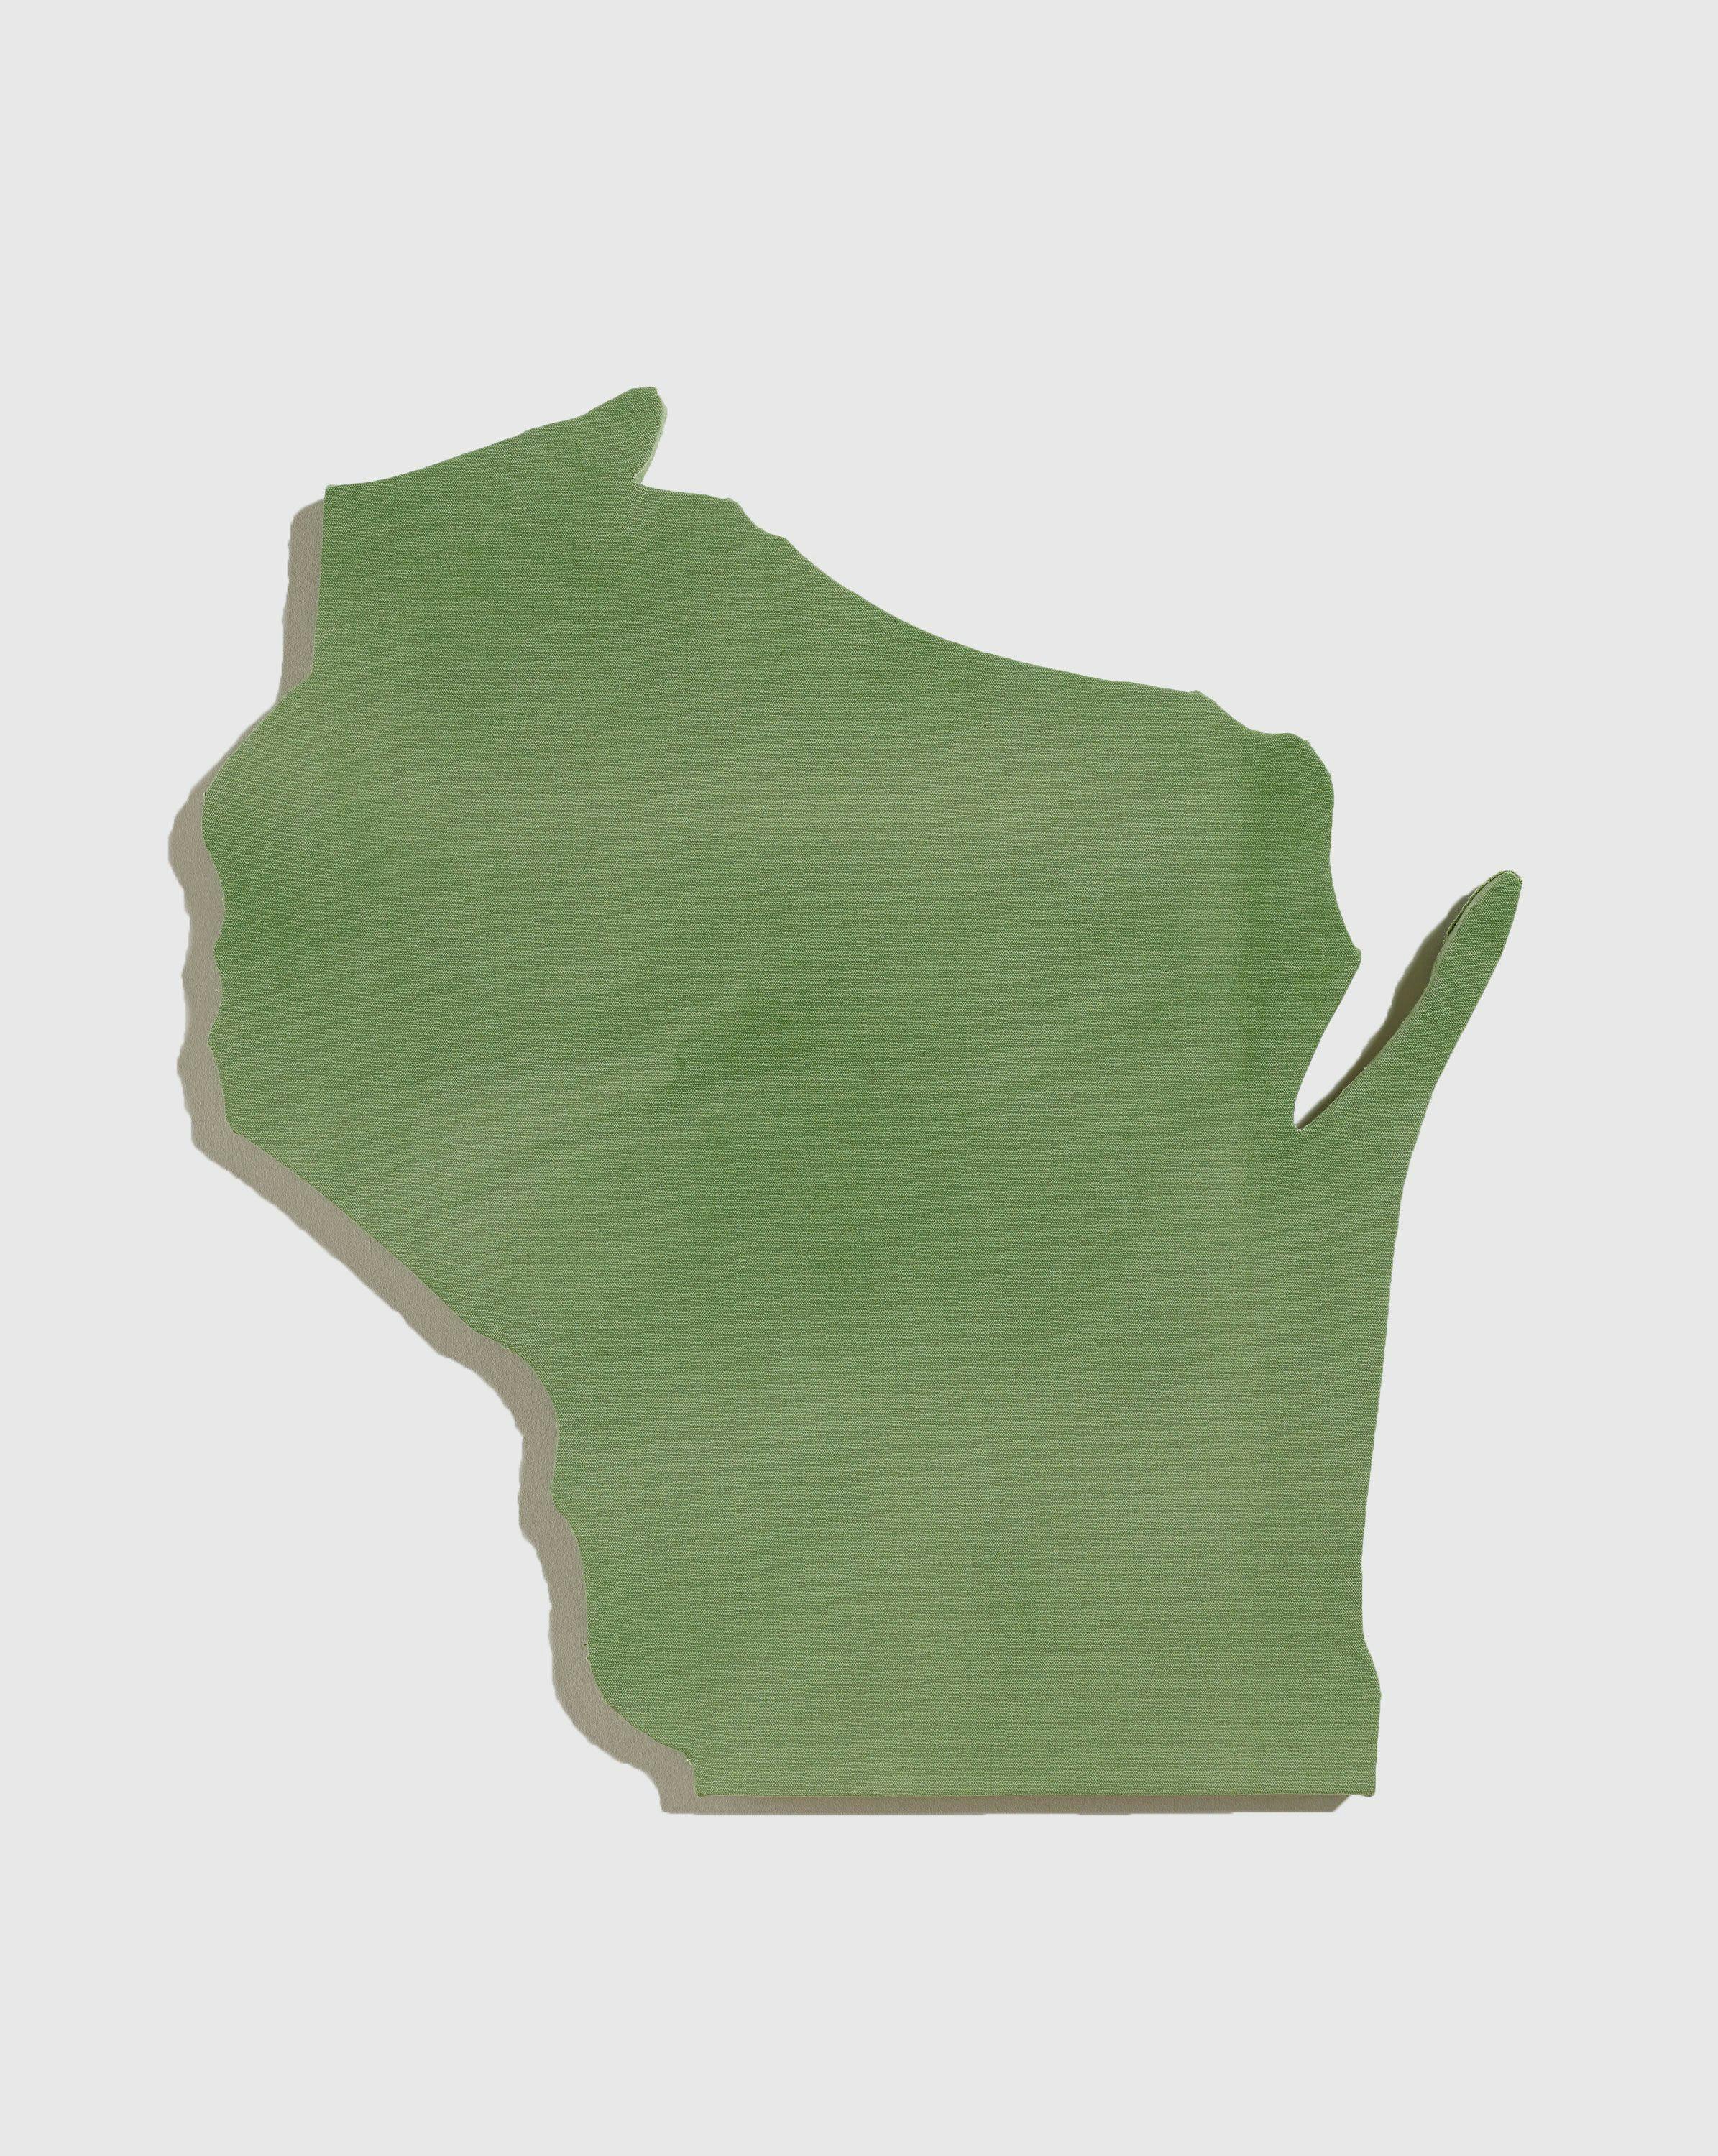 A painting by Nate Lowman, titled Green Wisconsin, dated 2014.